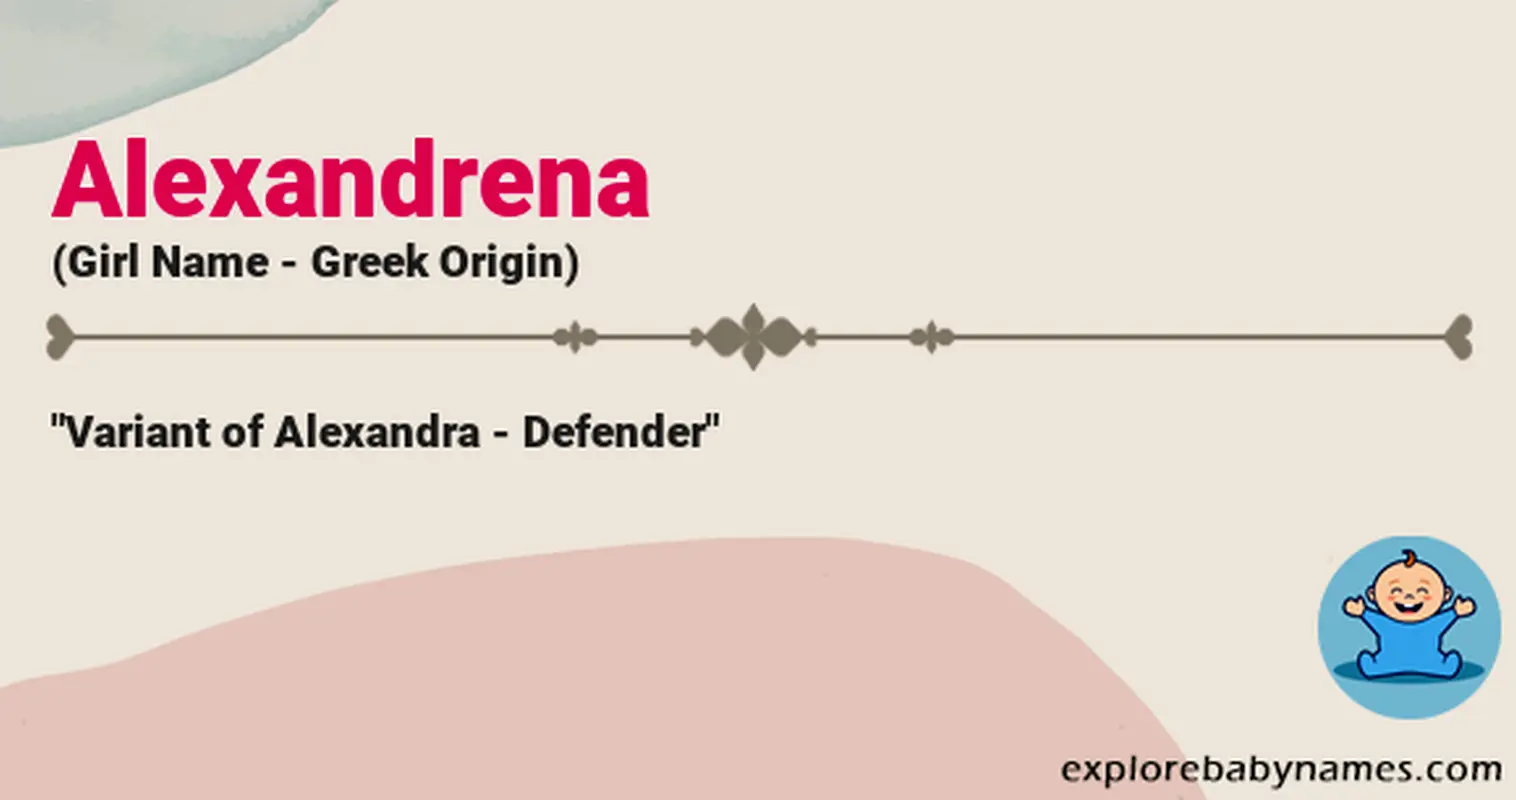 Meaning of Alexandrena